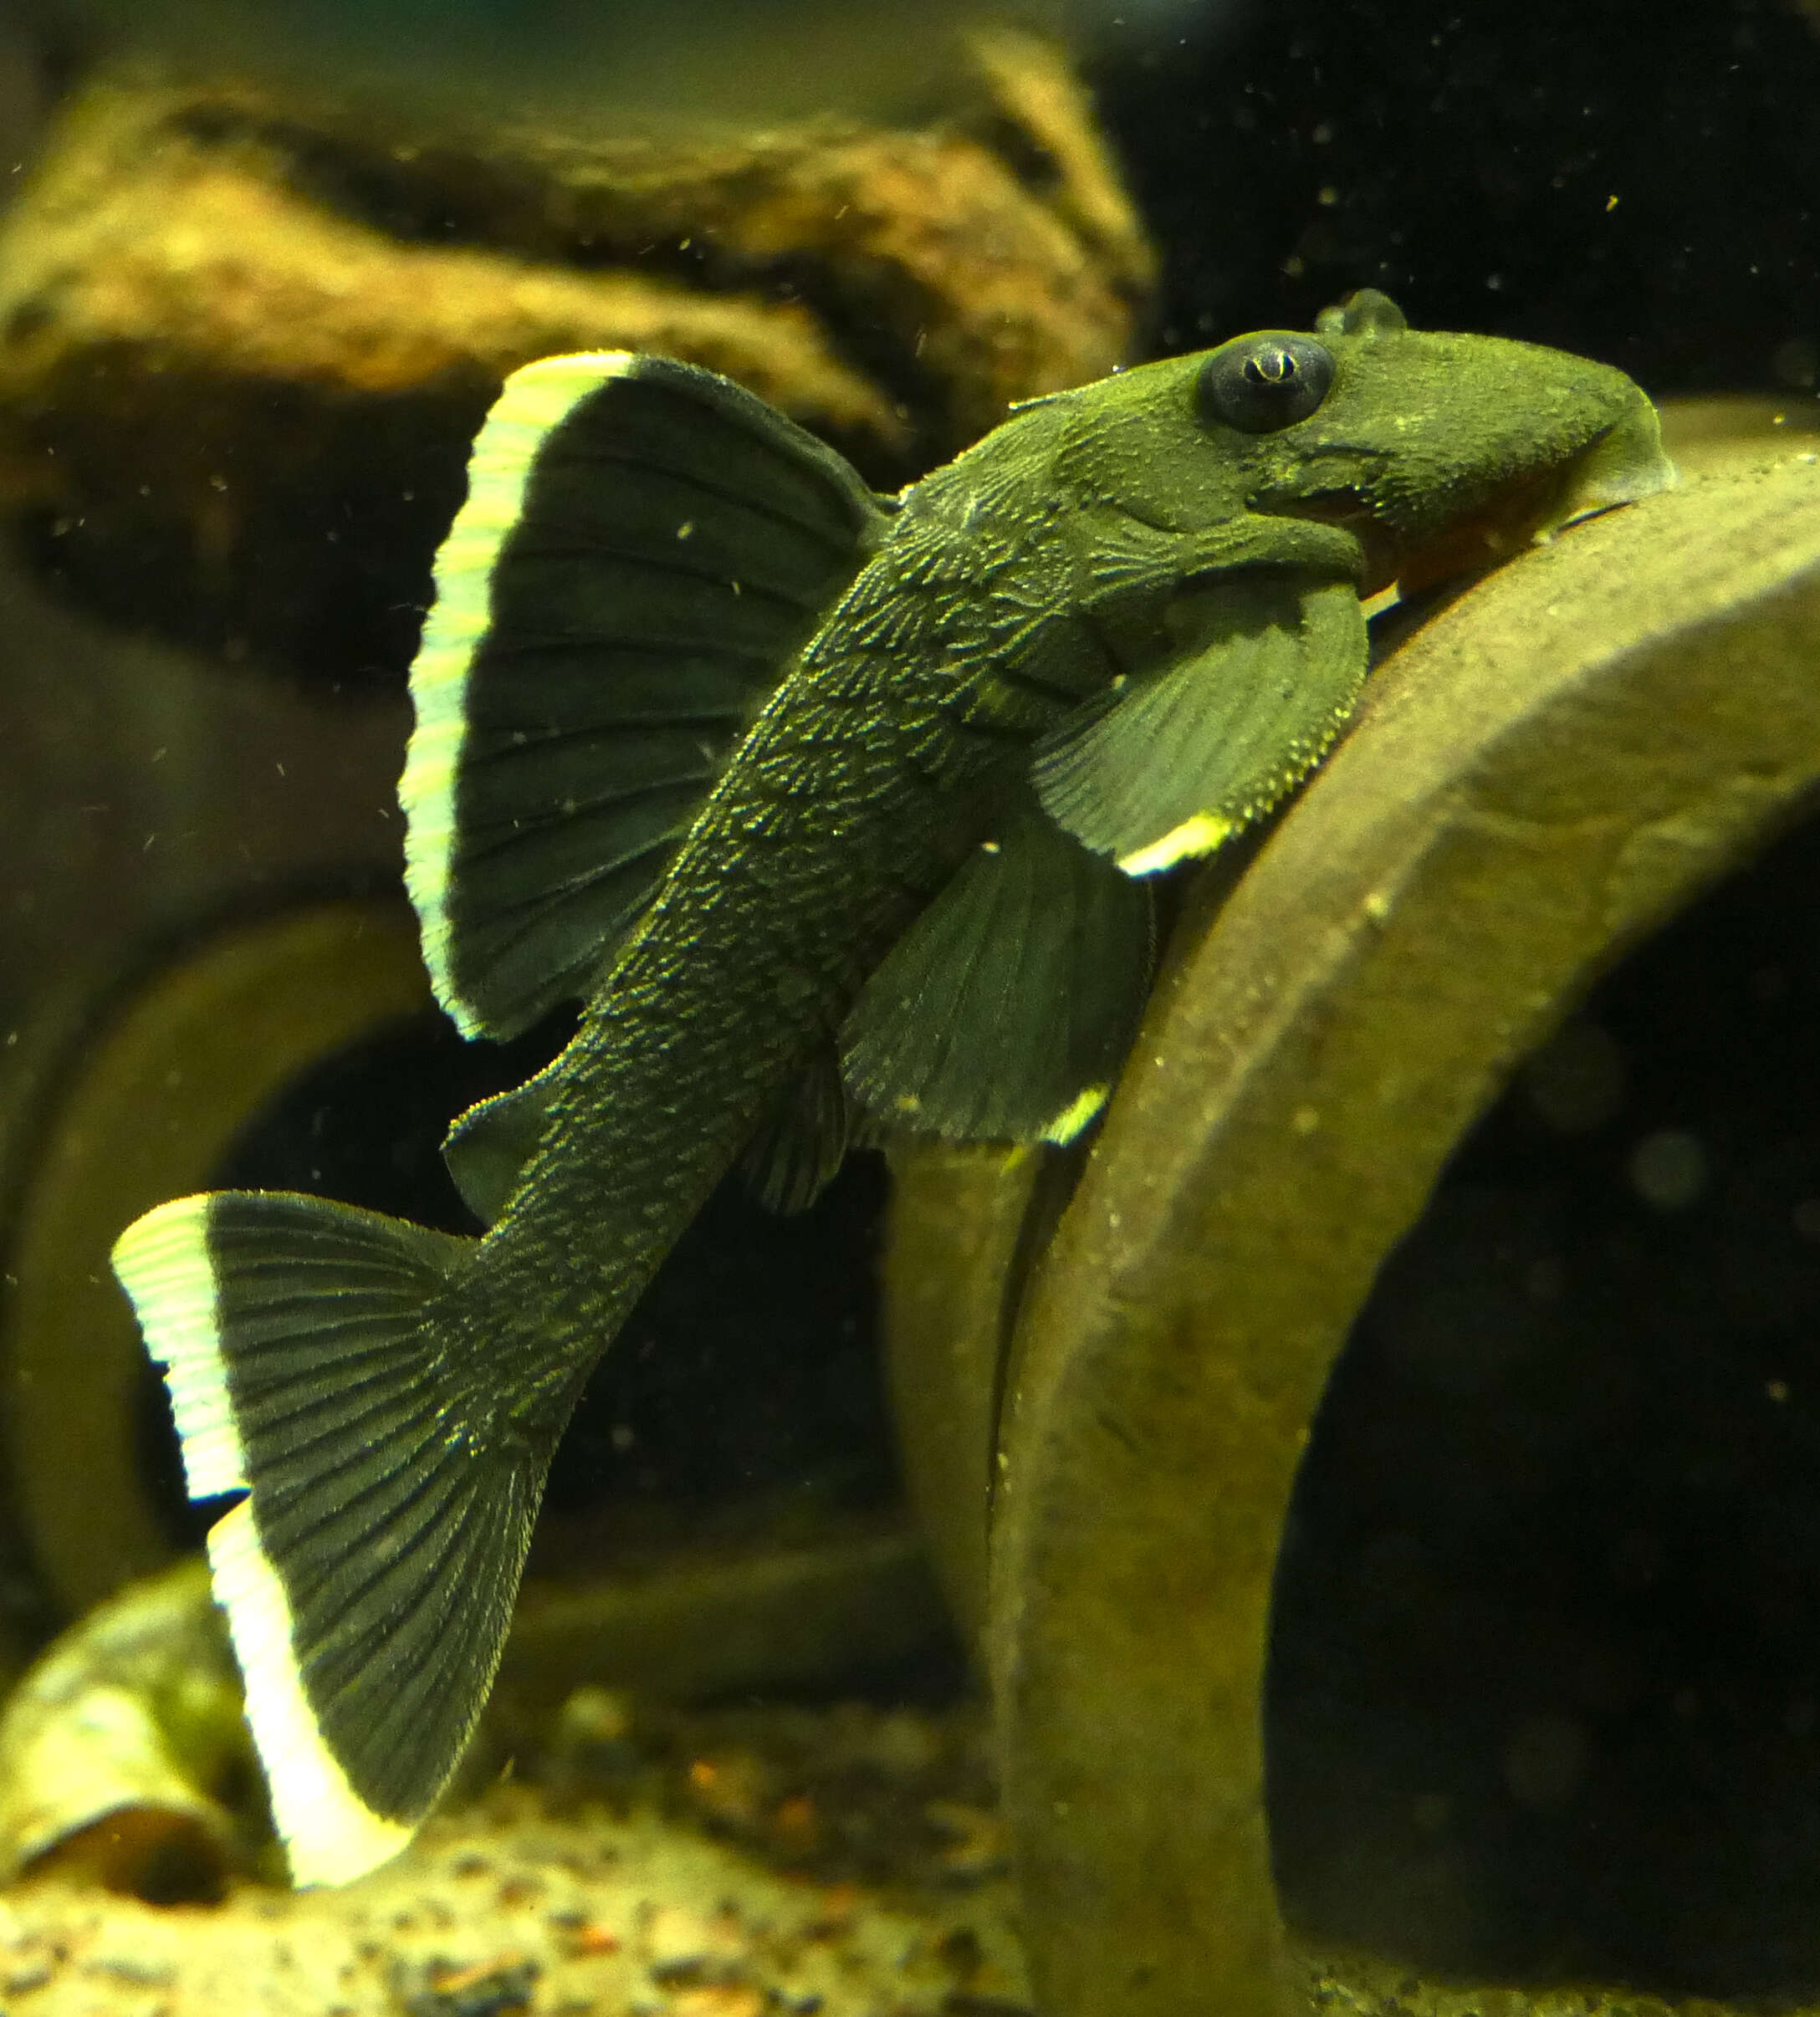 Image of suckermouth armored catfishes